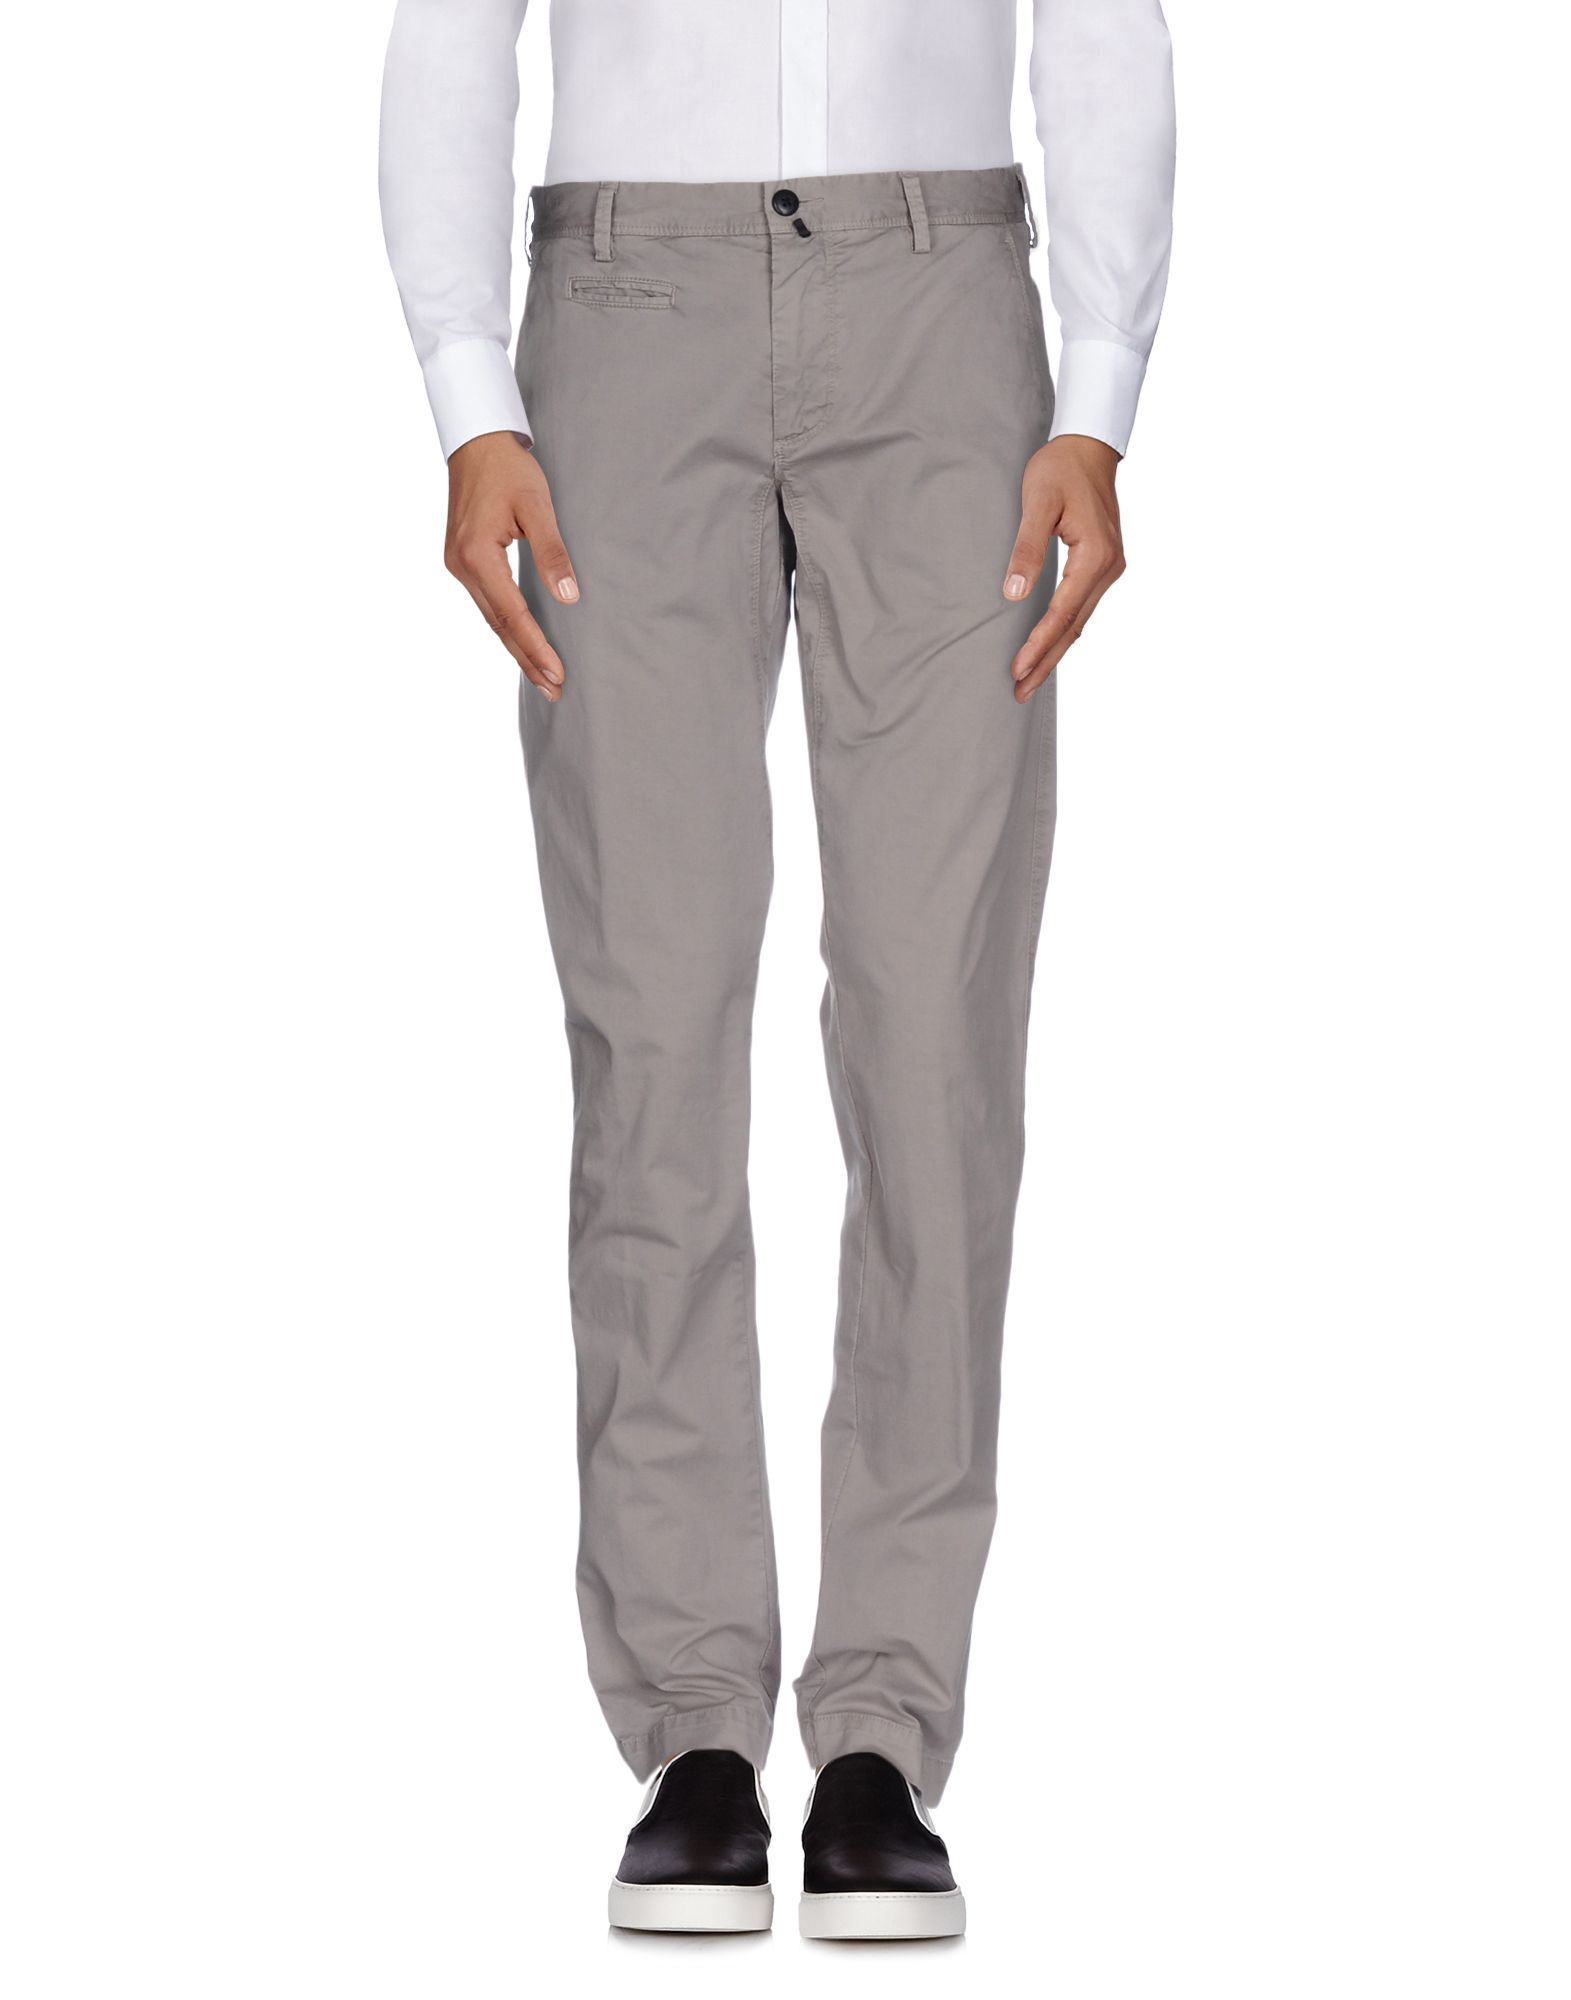 Jaggy Cotton Casual Trouser in Gray for Men - Lyst